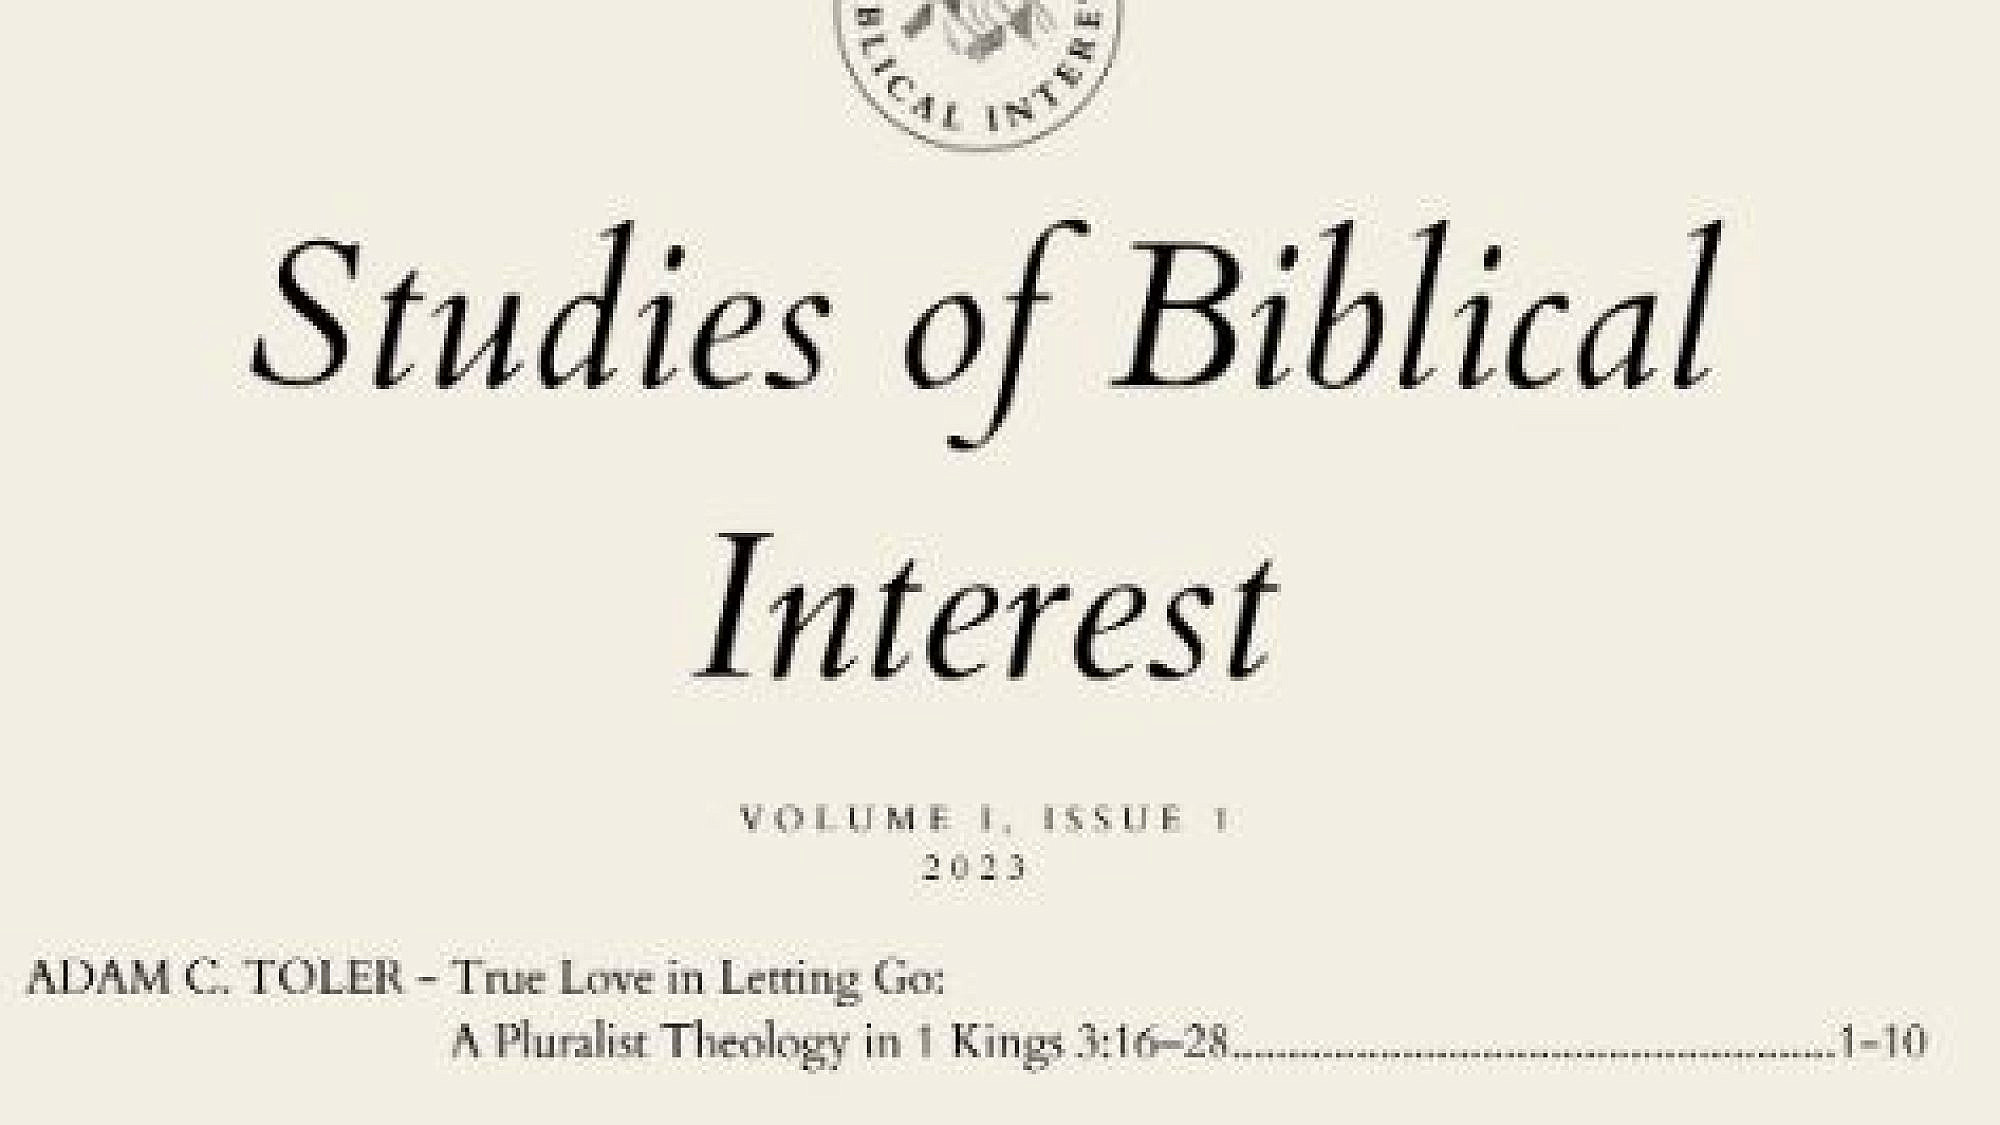 Studies of Biblical Interest was launched in 2023. Courtesy.